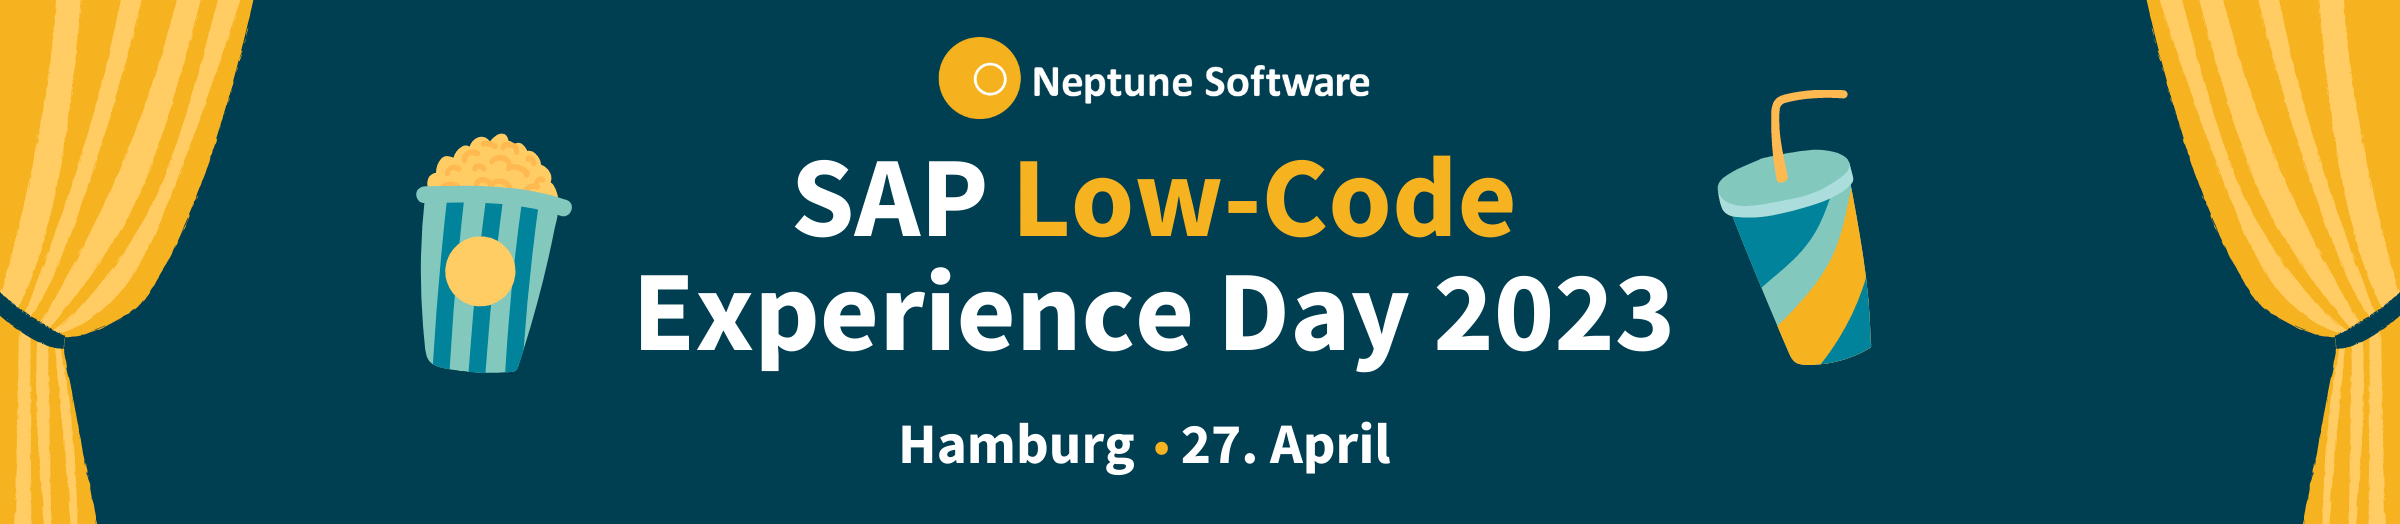 SAP Low-Code Experience Day 2023 